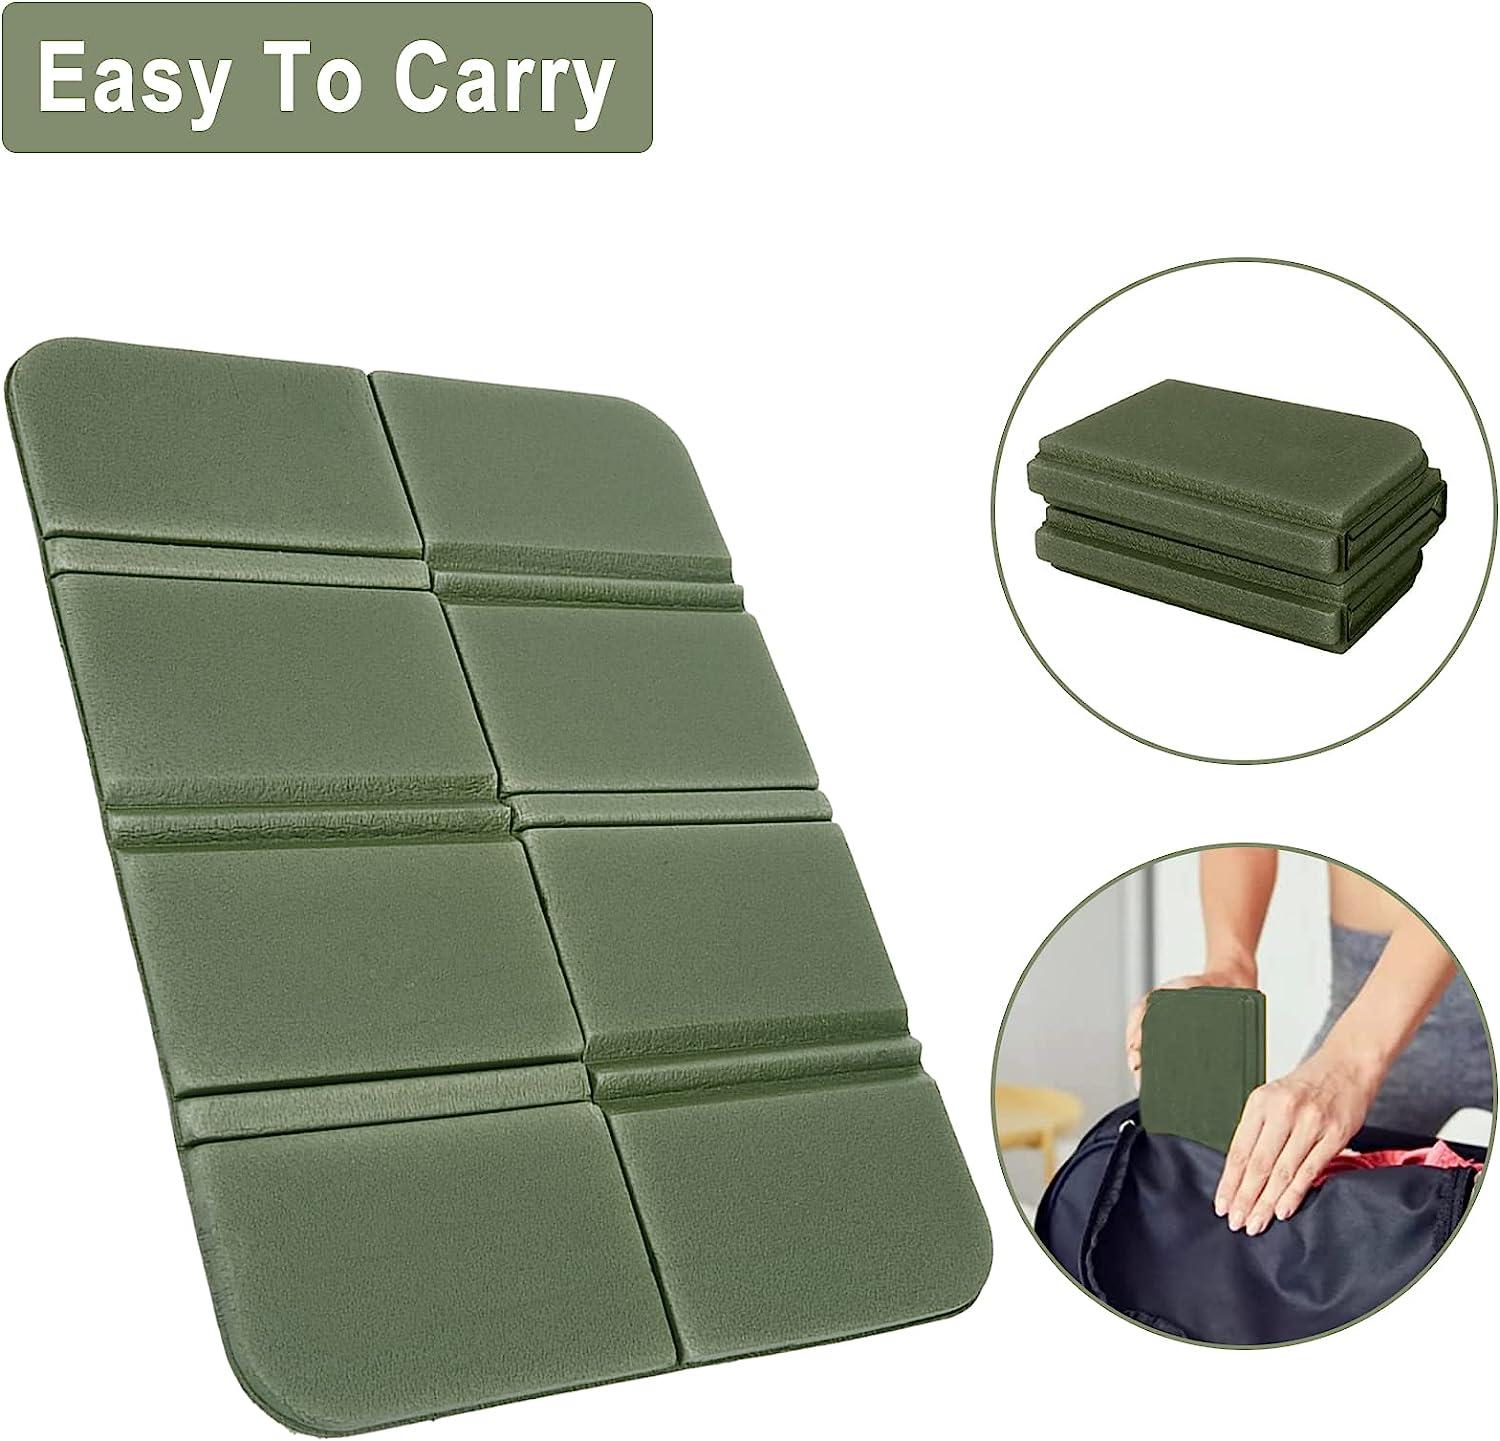 Acecamp 3940 Portable Lightweight Waterproof Folding Mat, Sitting Pad for  Outdoor, Foldable Kneeling and Seat Cushion for Comfort 